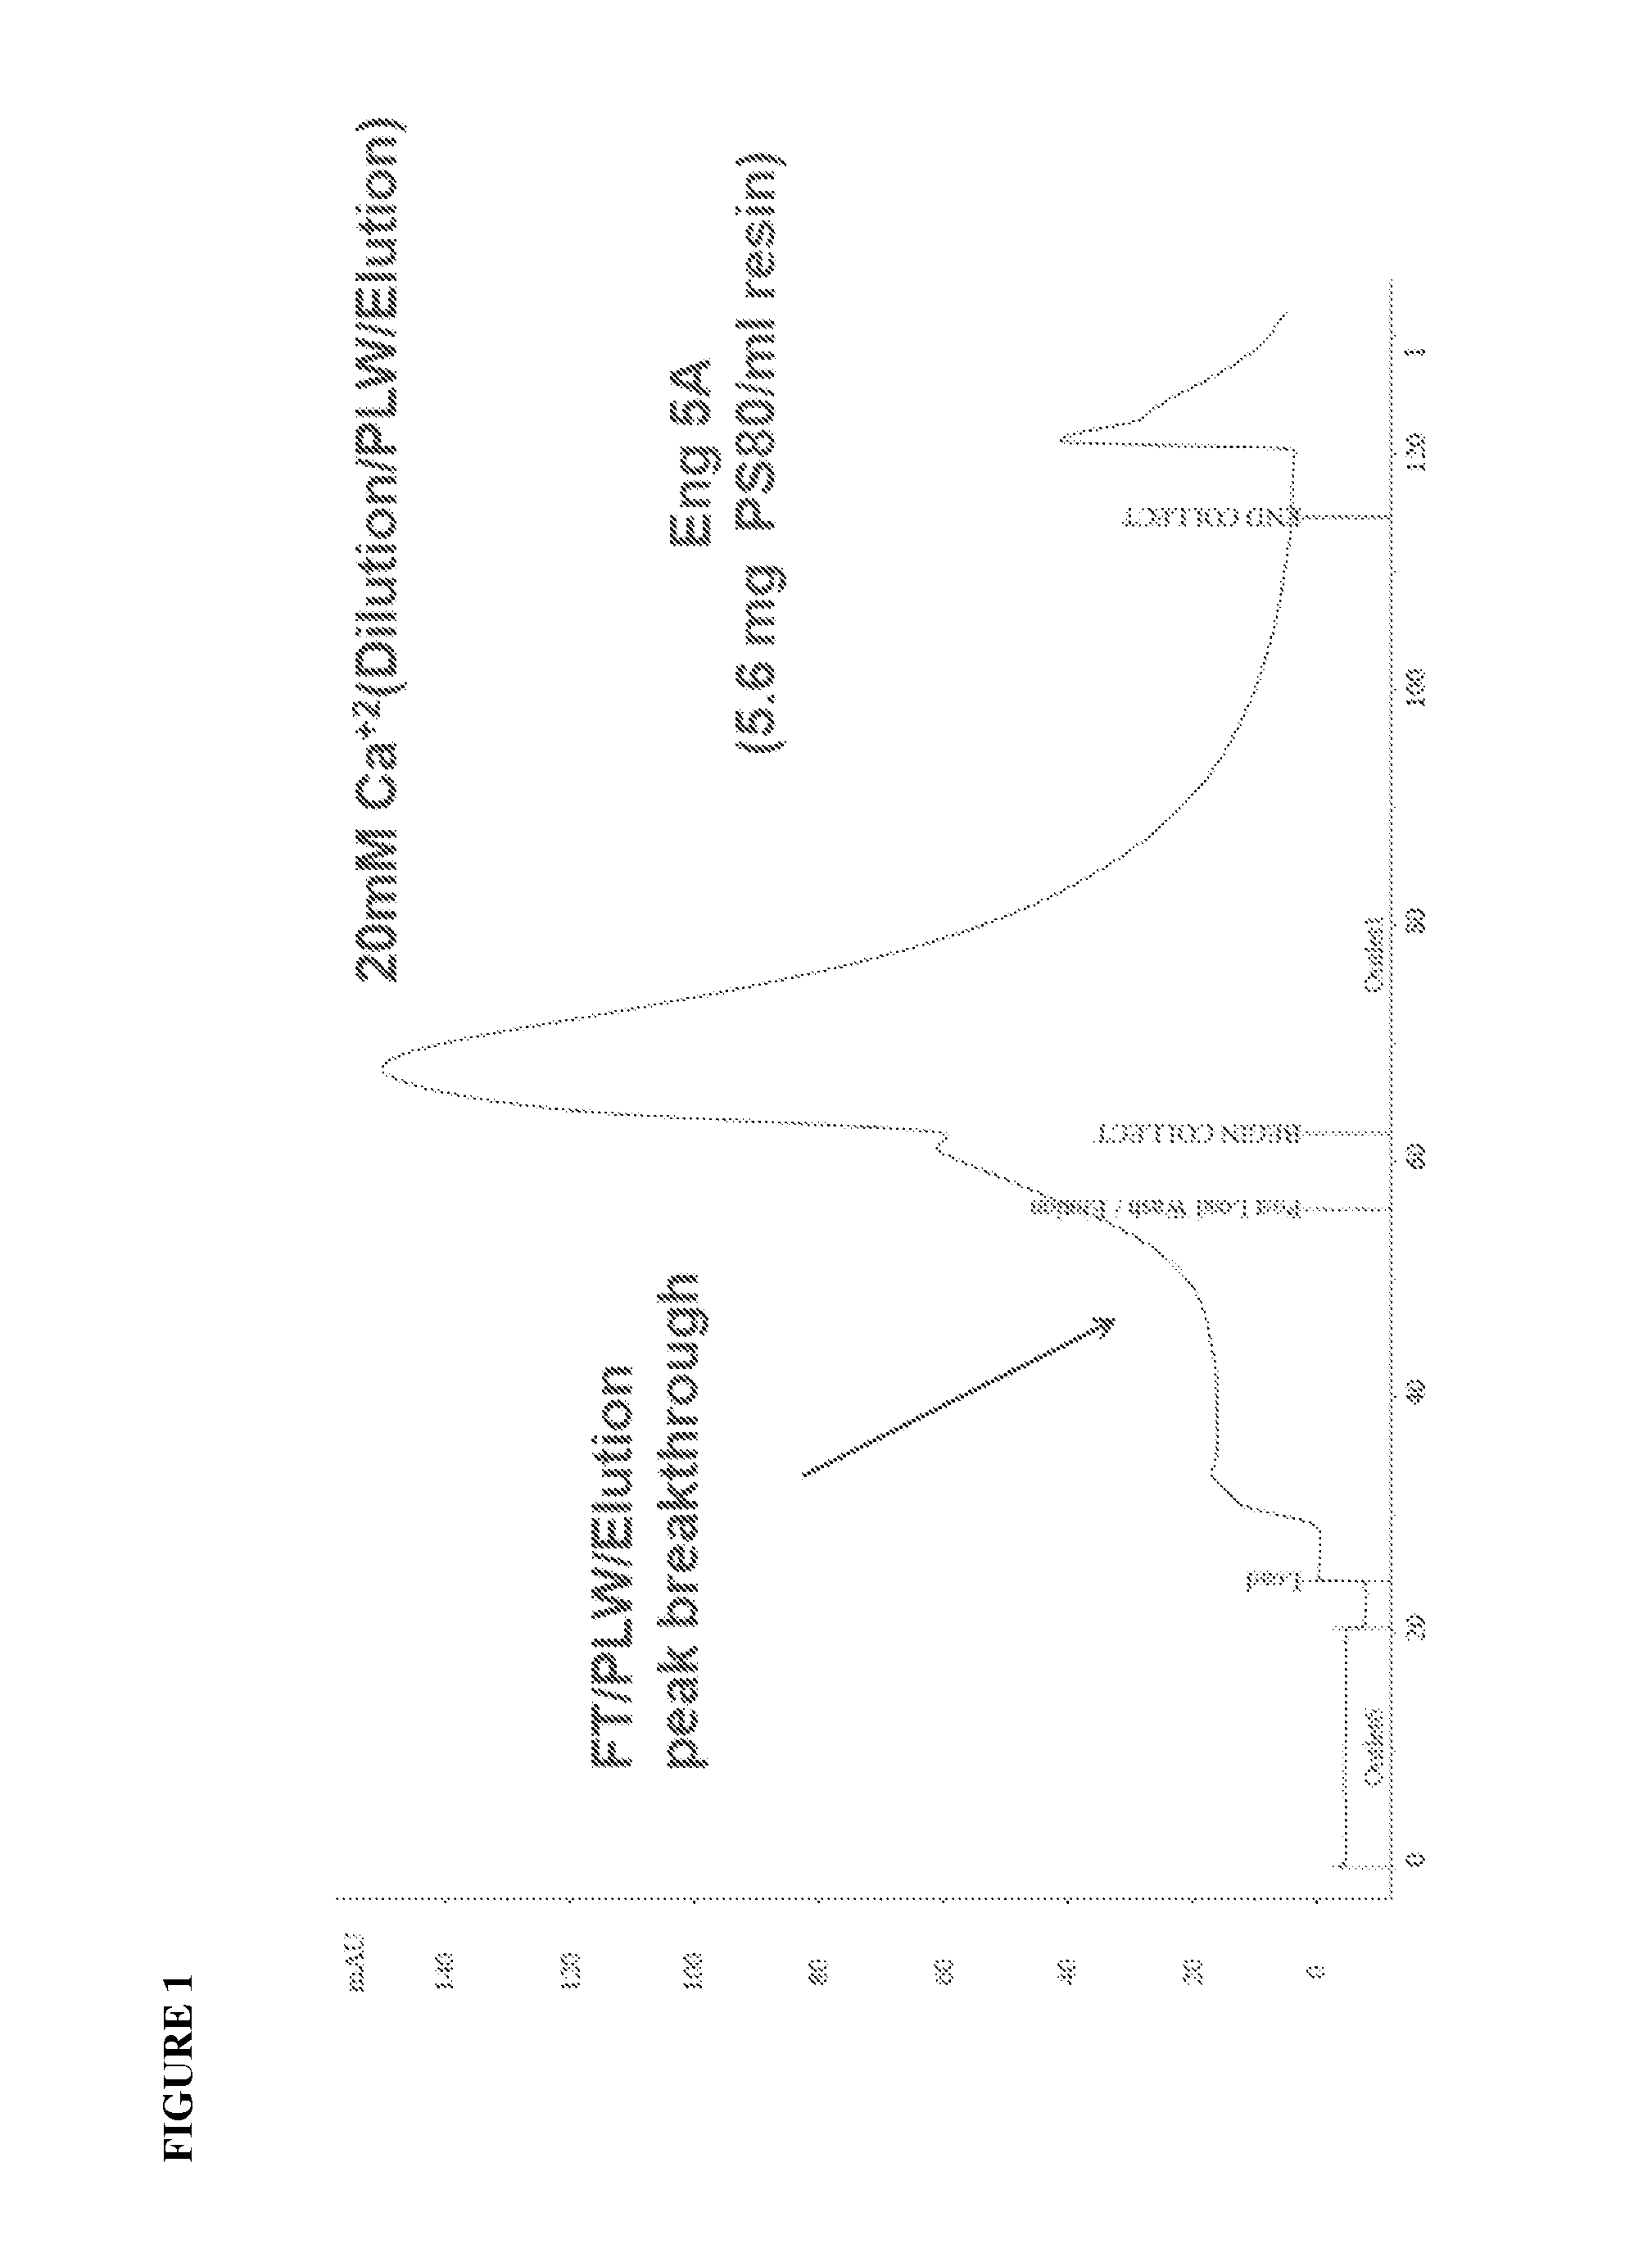 Method of purifying factor VII and/or factor VIIa